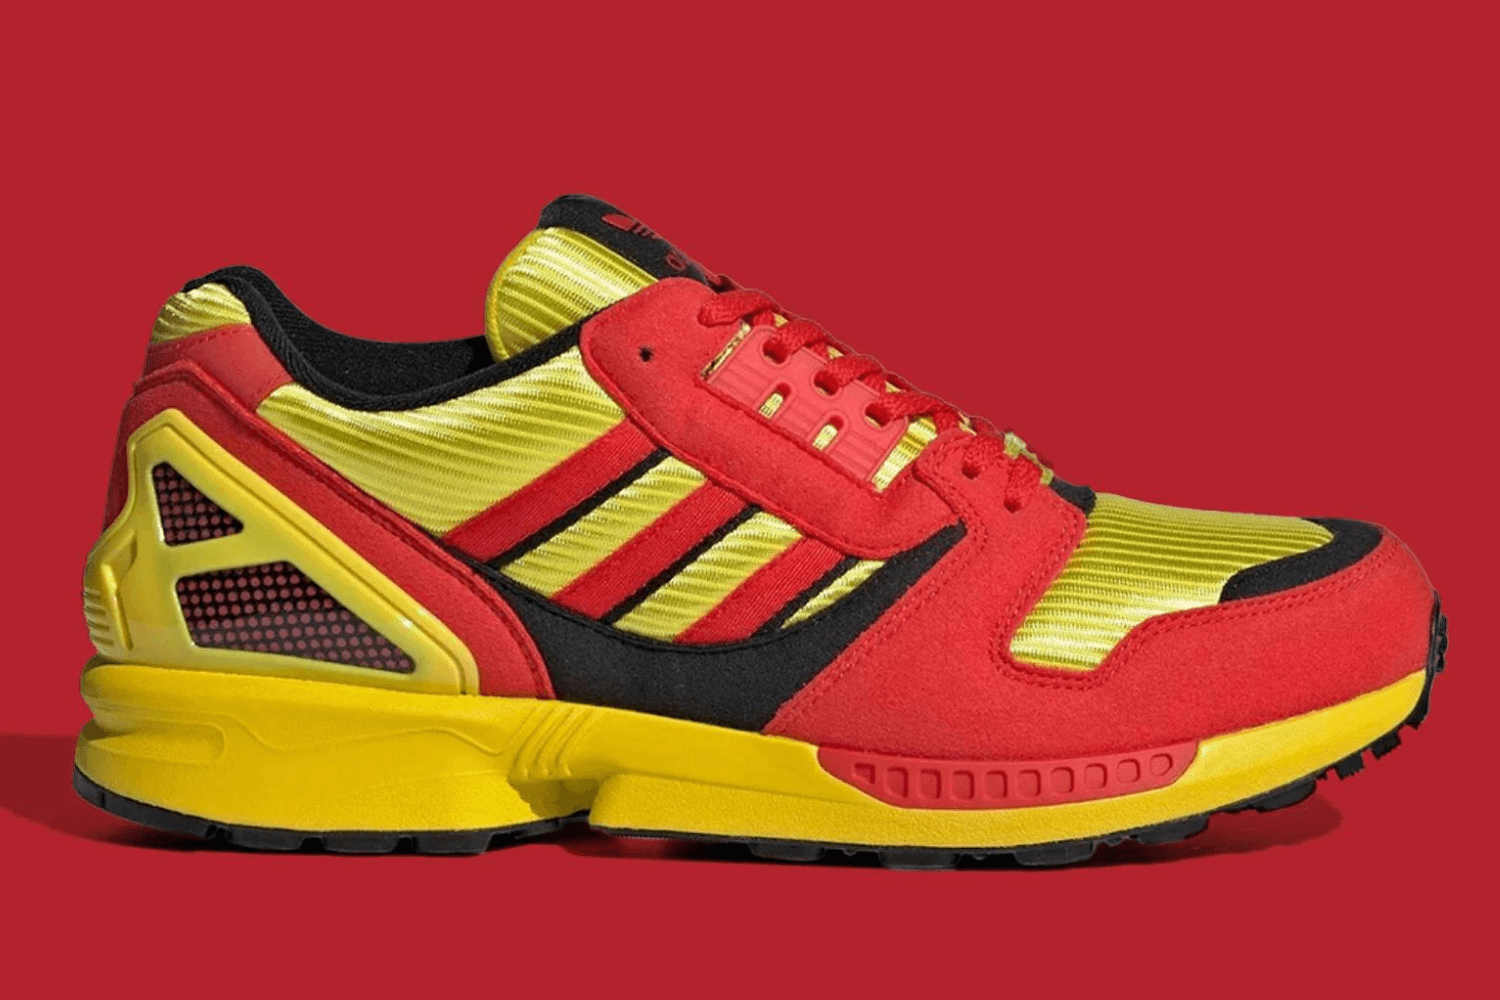 The adidas ZX 8000 gets a DHL colorway